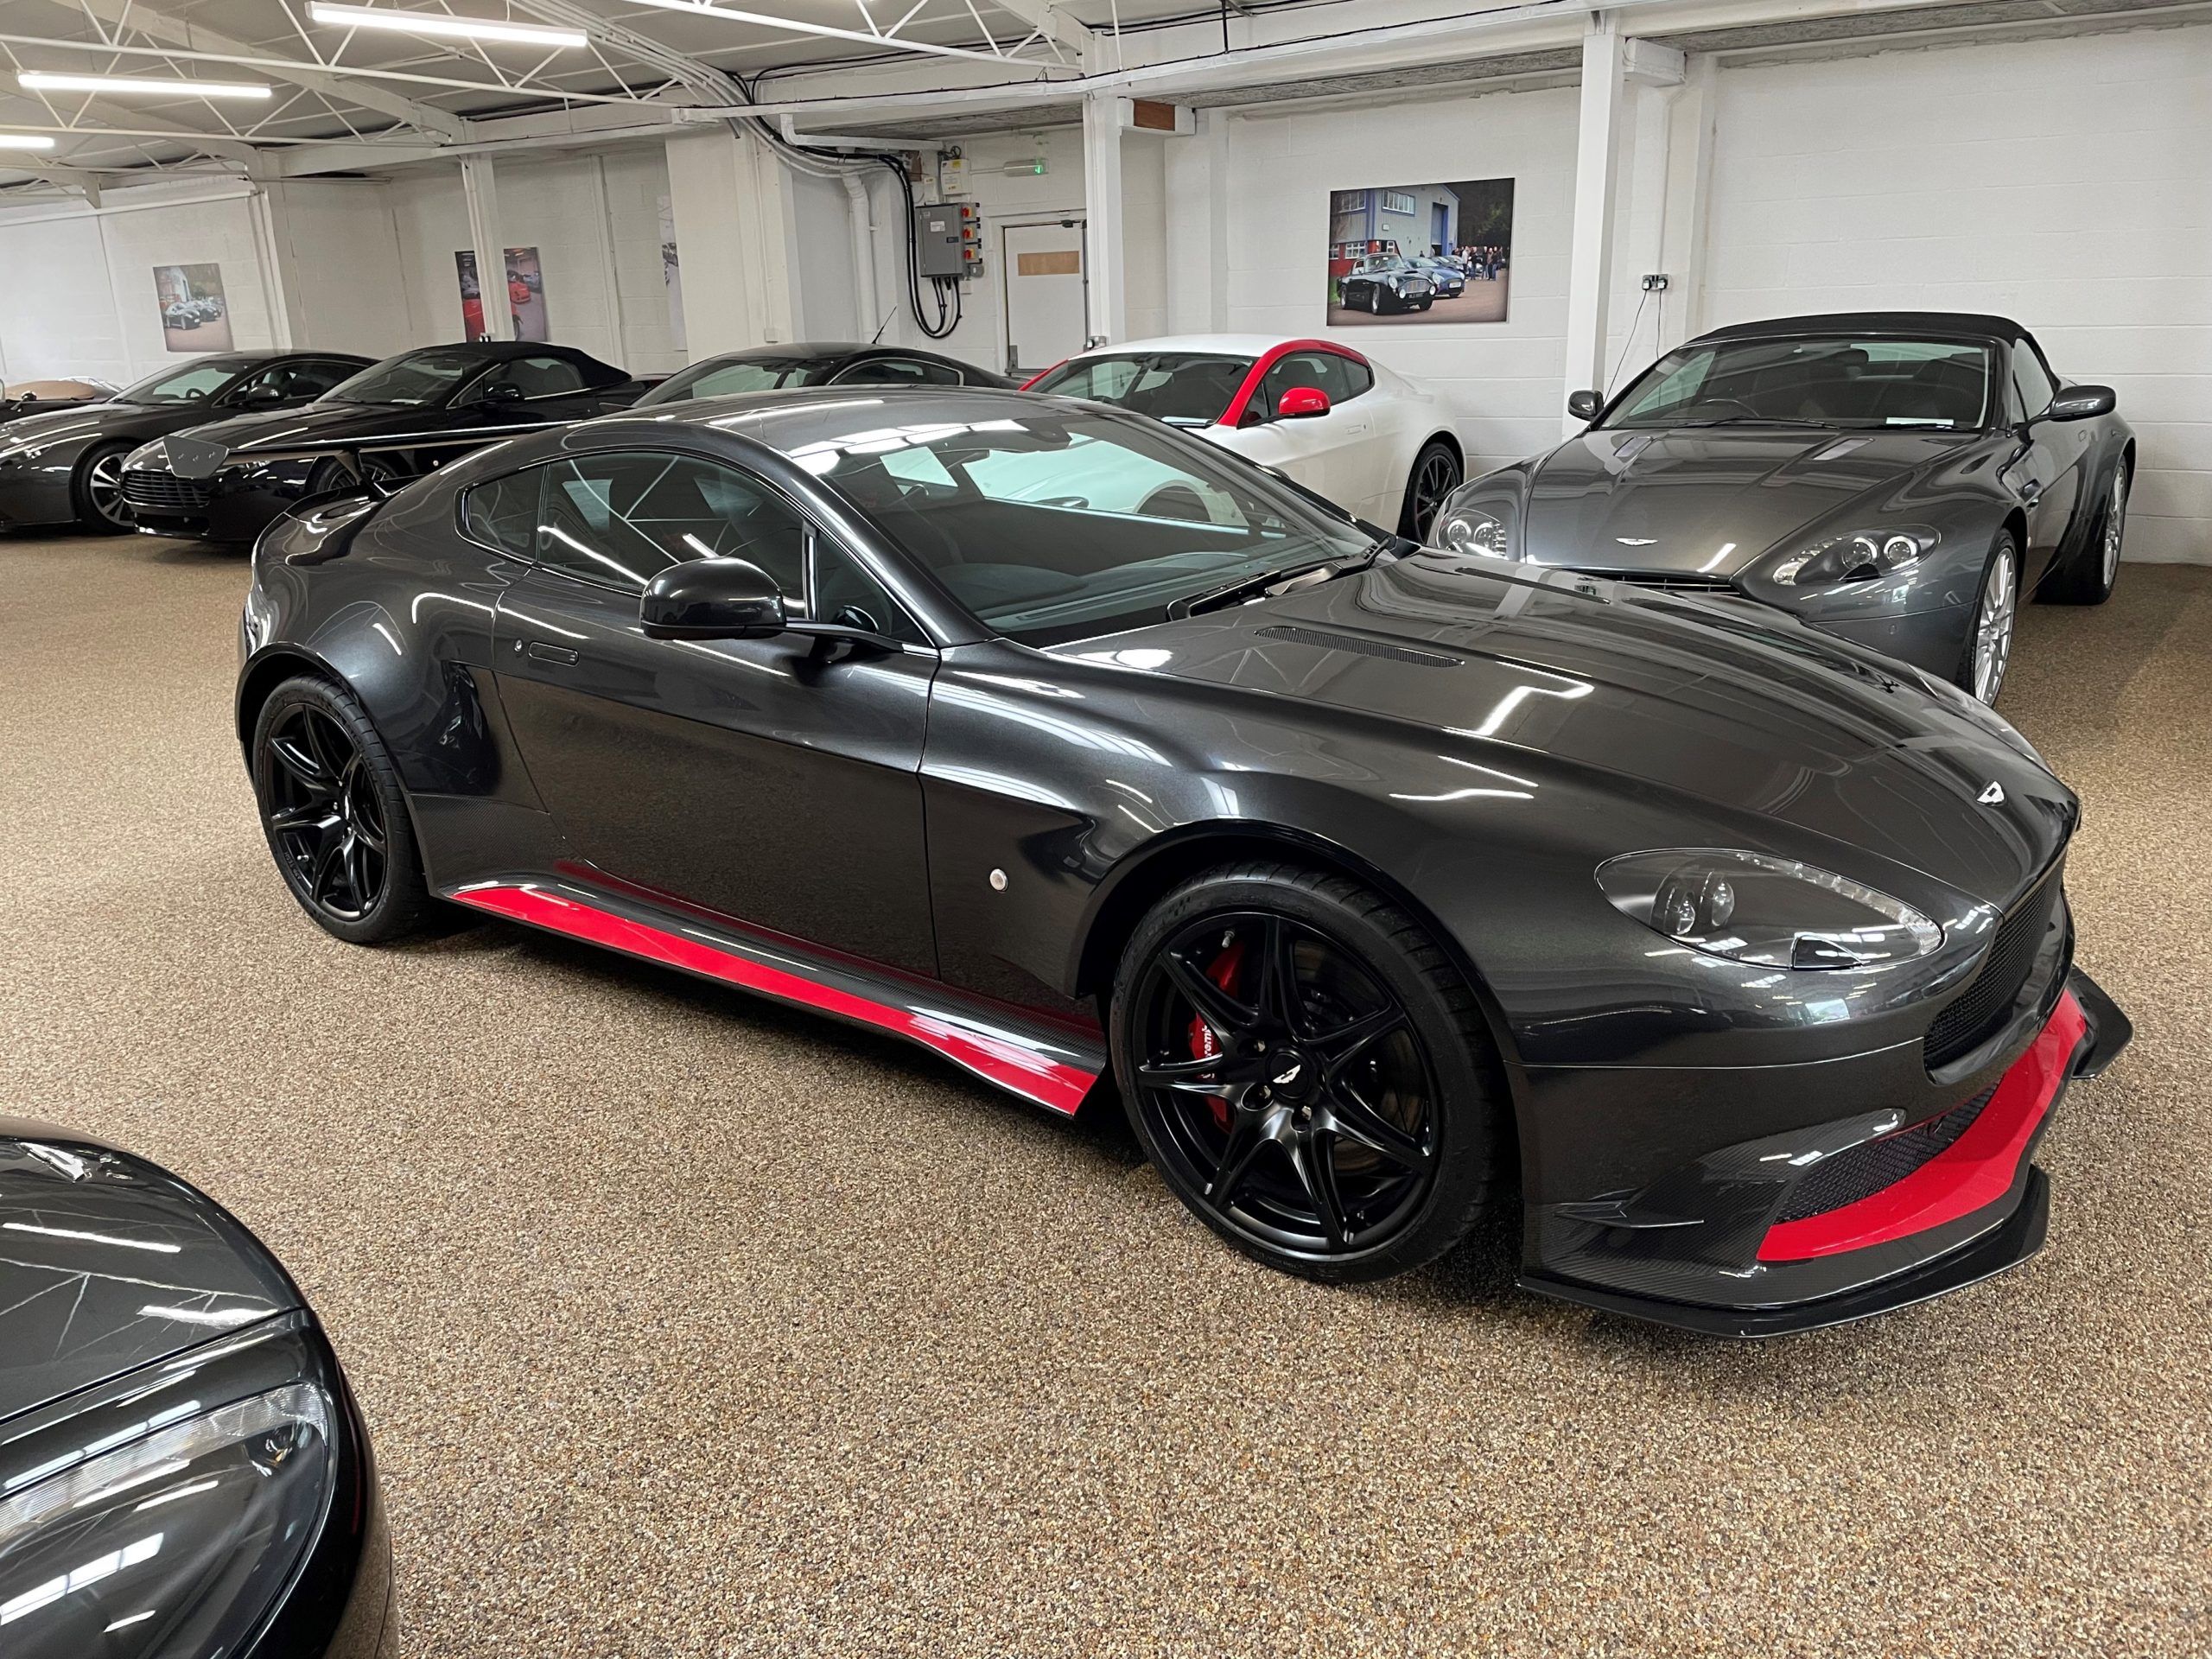 Aston MArtin GT8 for sale